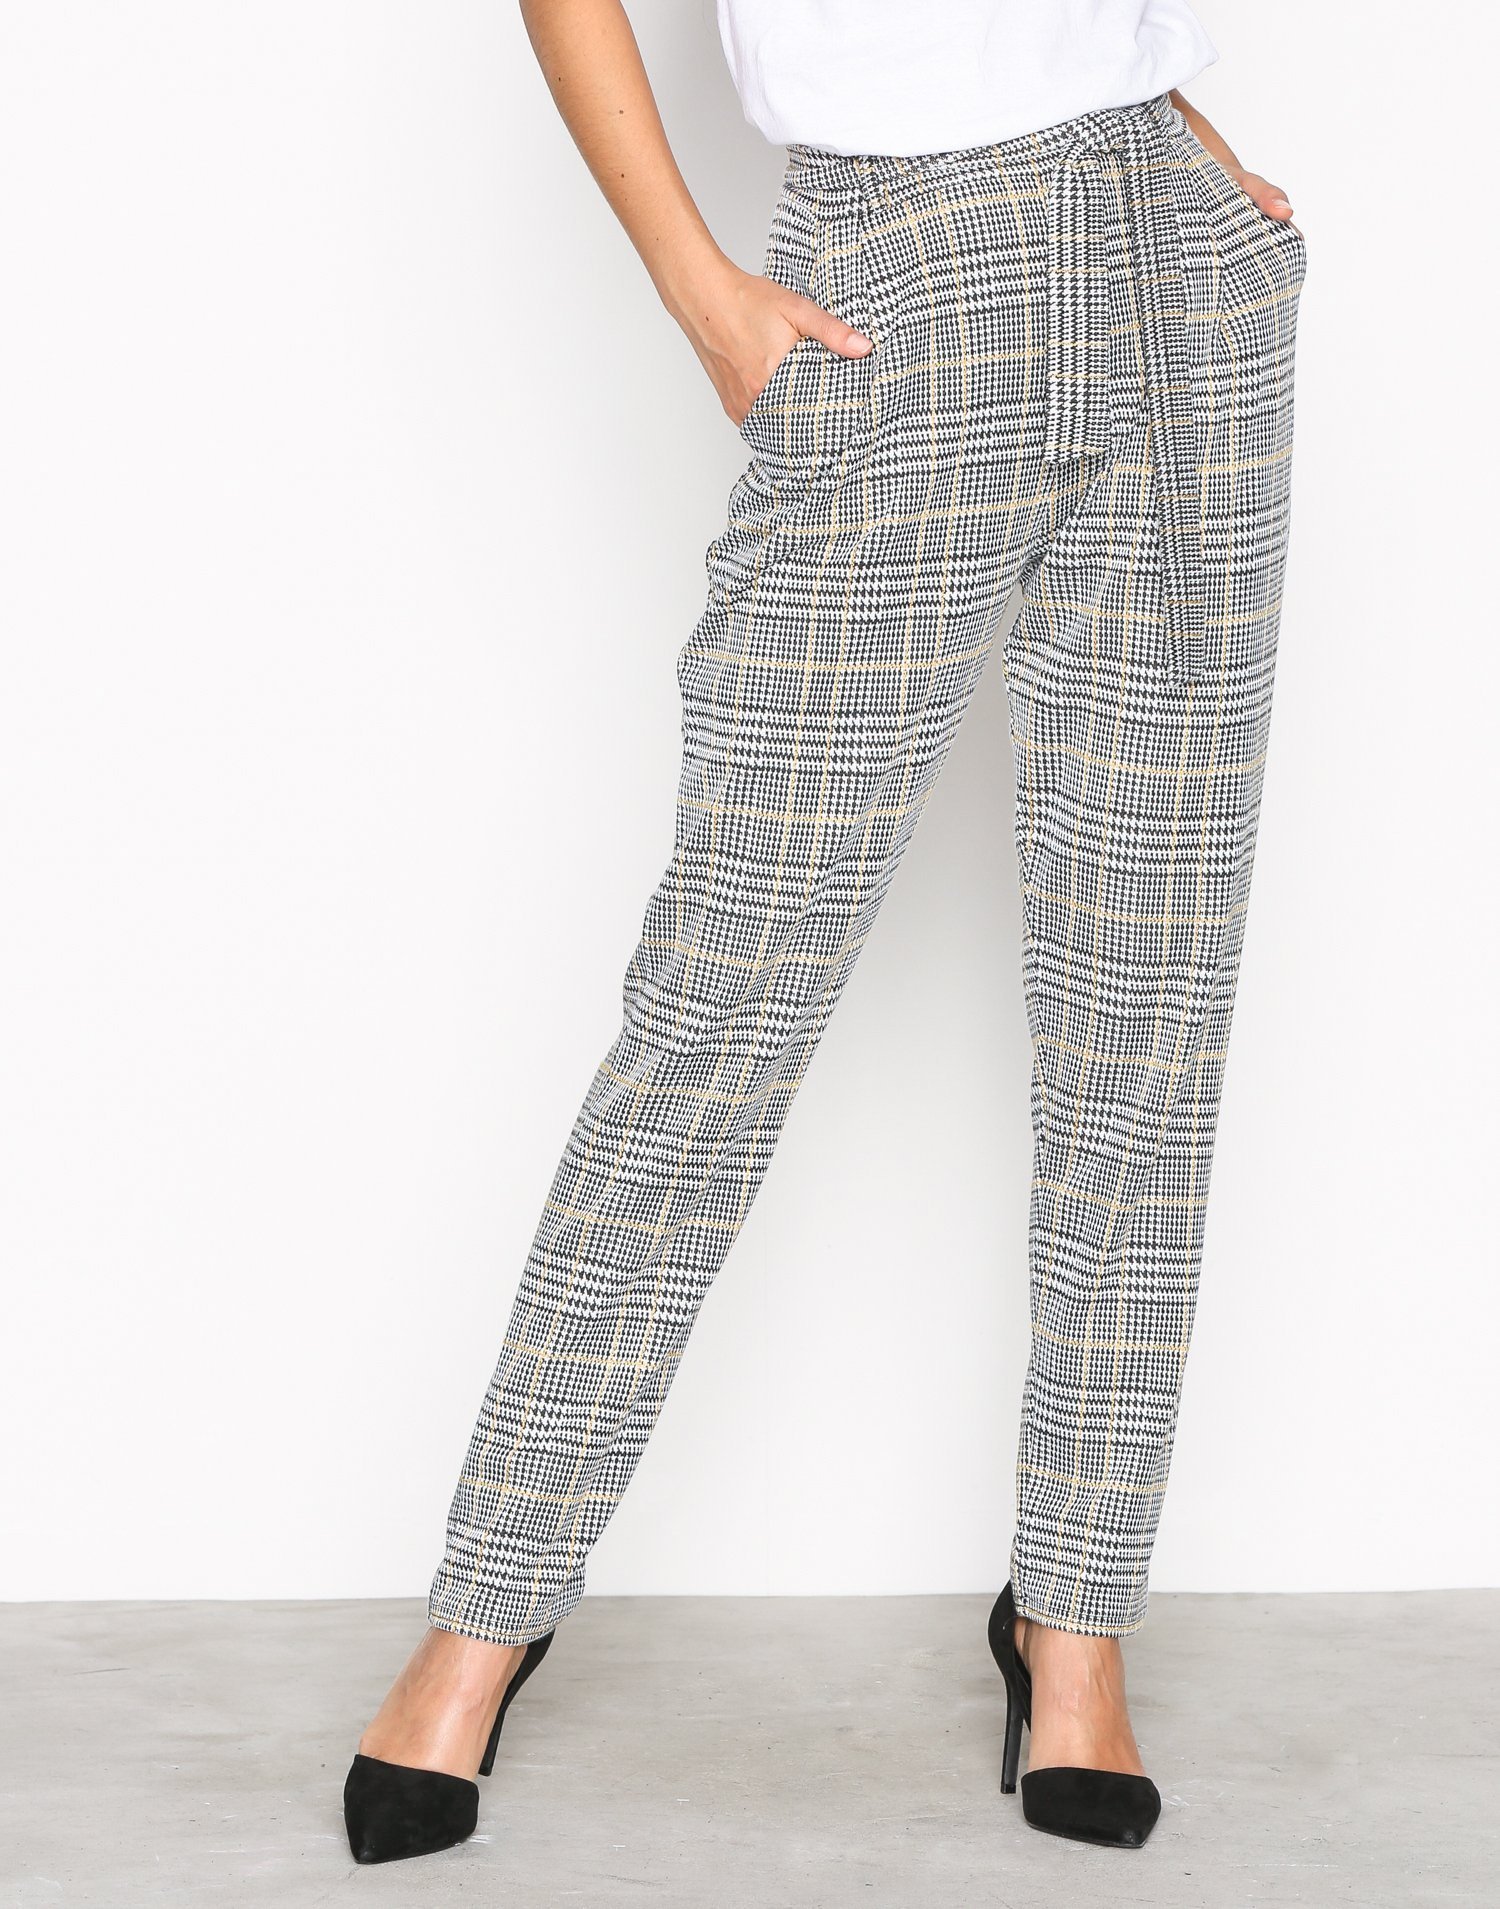 Dressed Check Pants - Nly Trend - Checkered - Pants & Shorts - Clothing ...